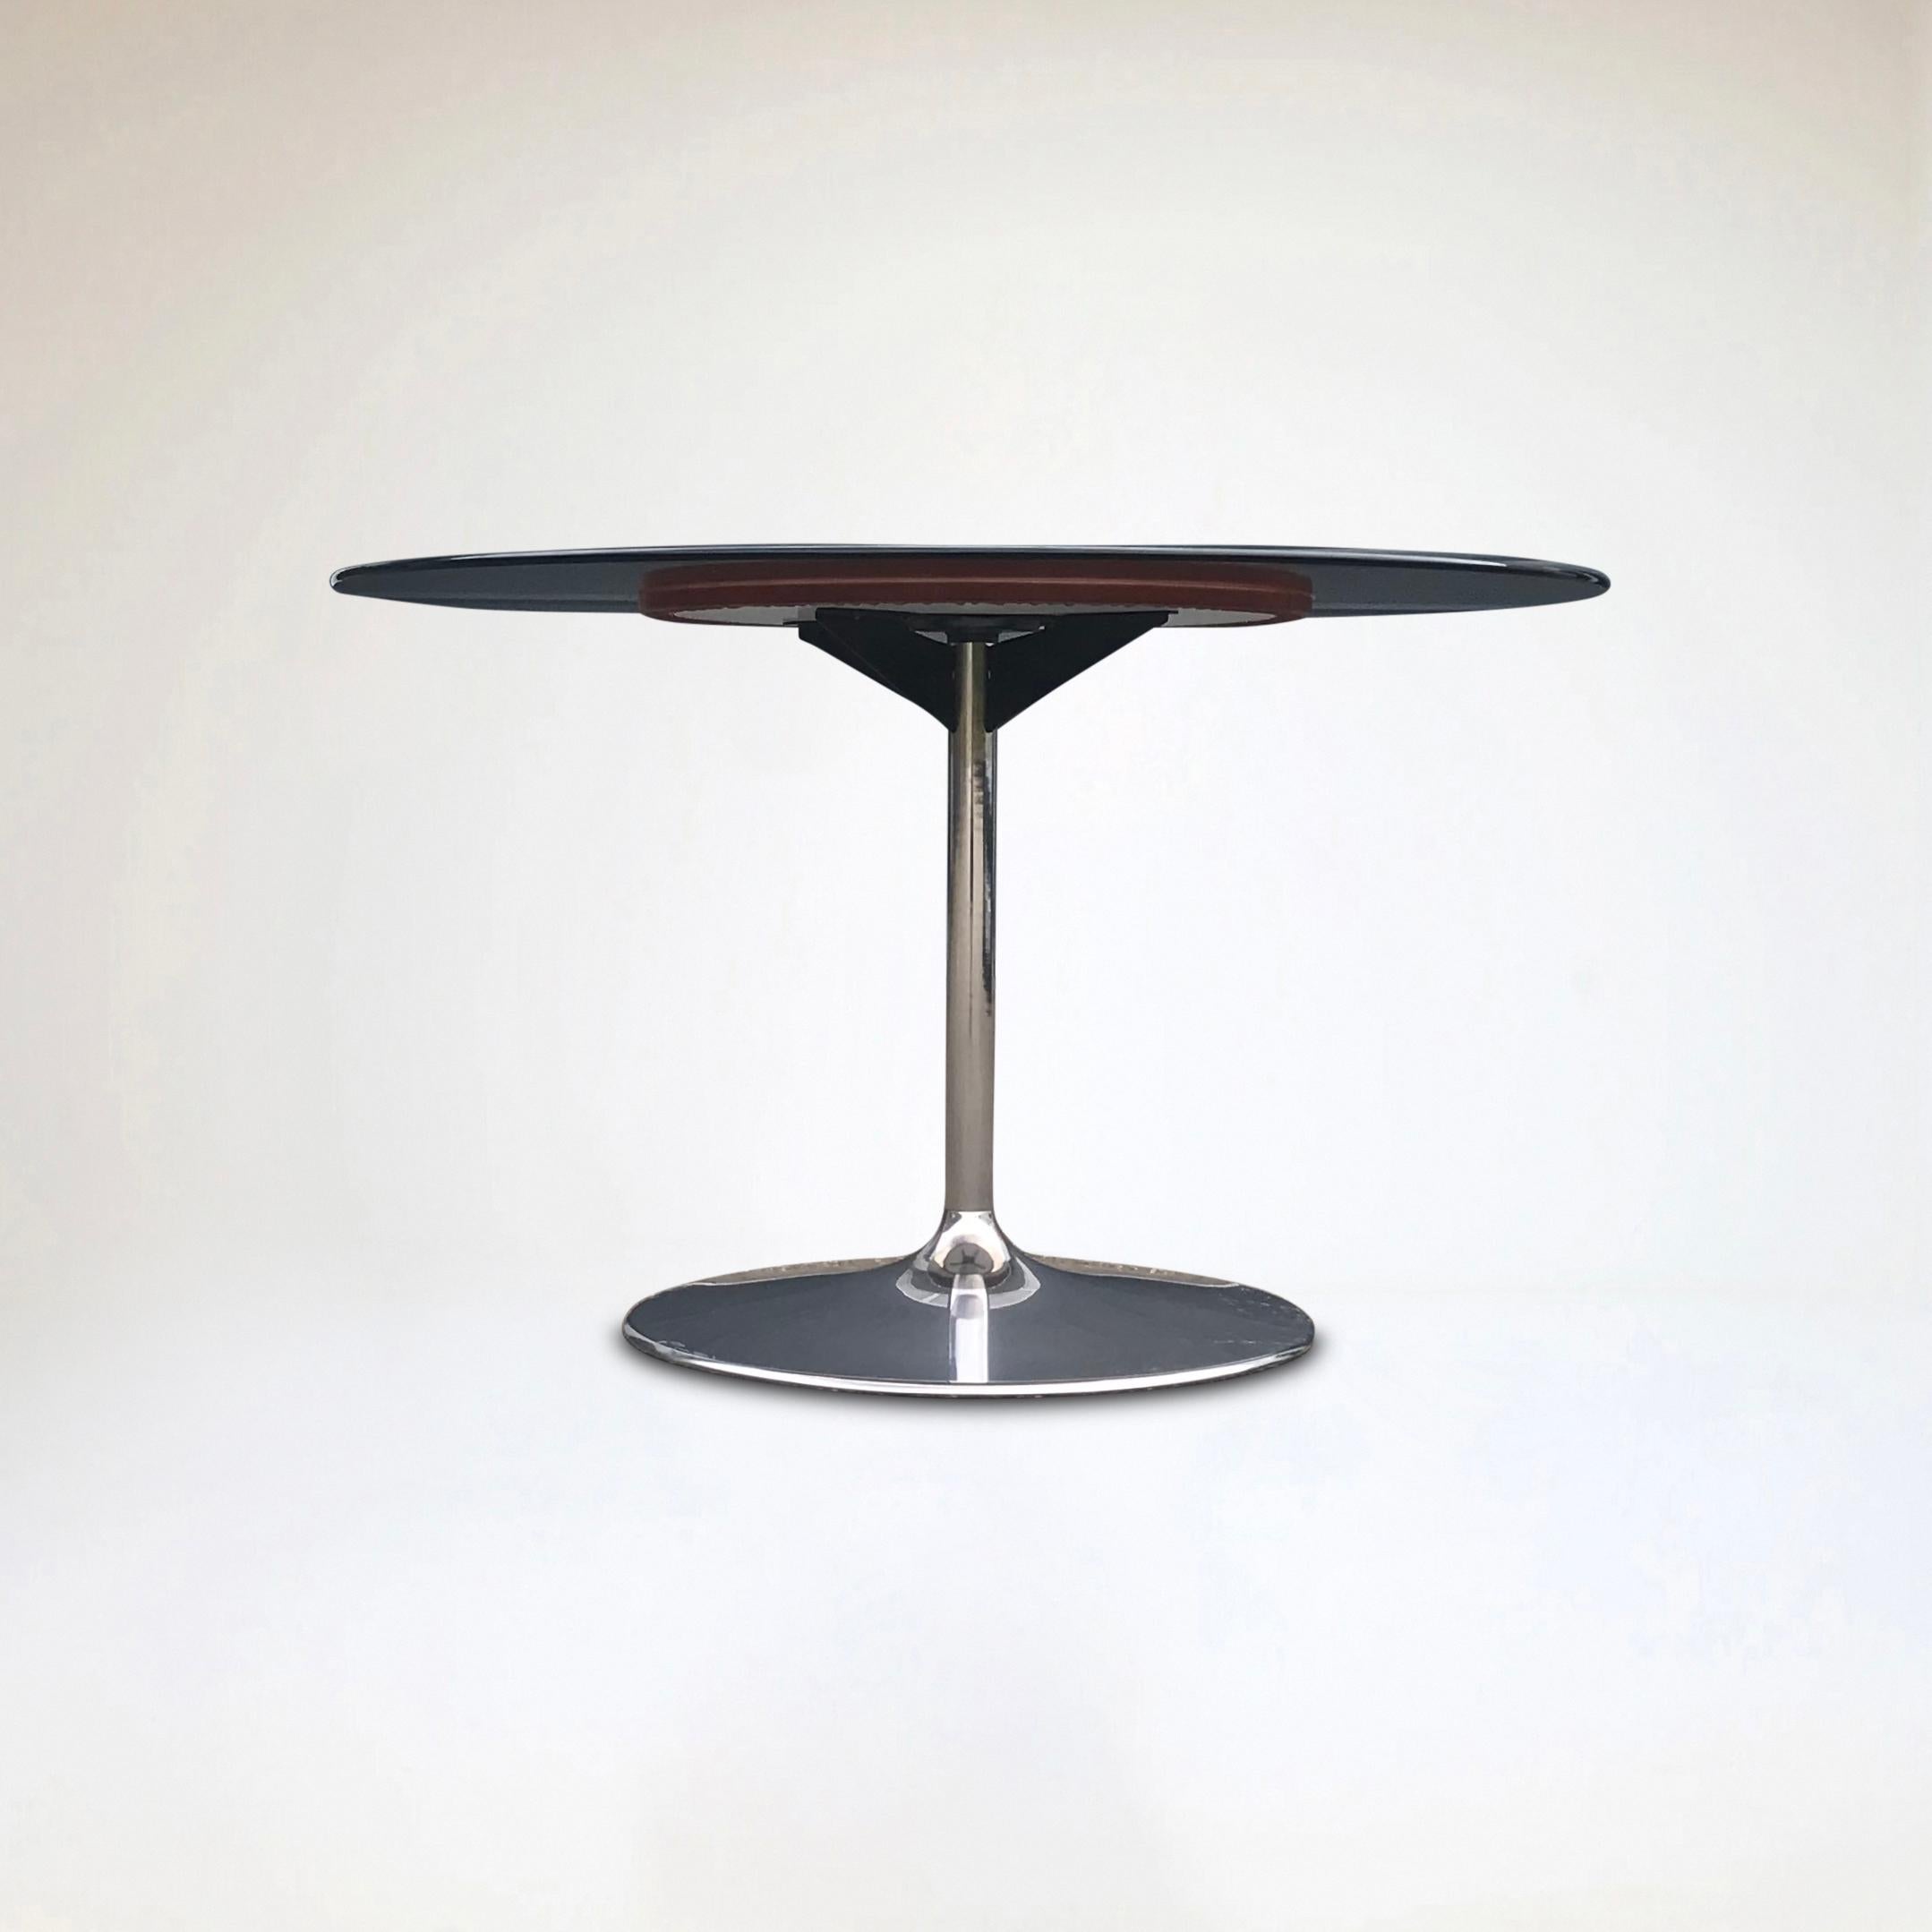 American Tulip glass and metal space age dining table by Chromcraft USA 1970s For Sale